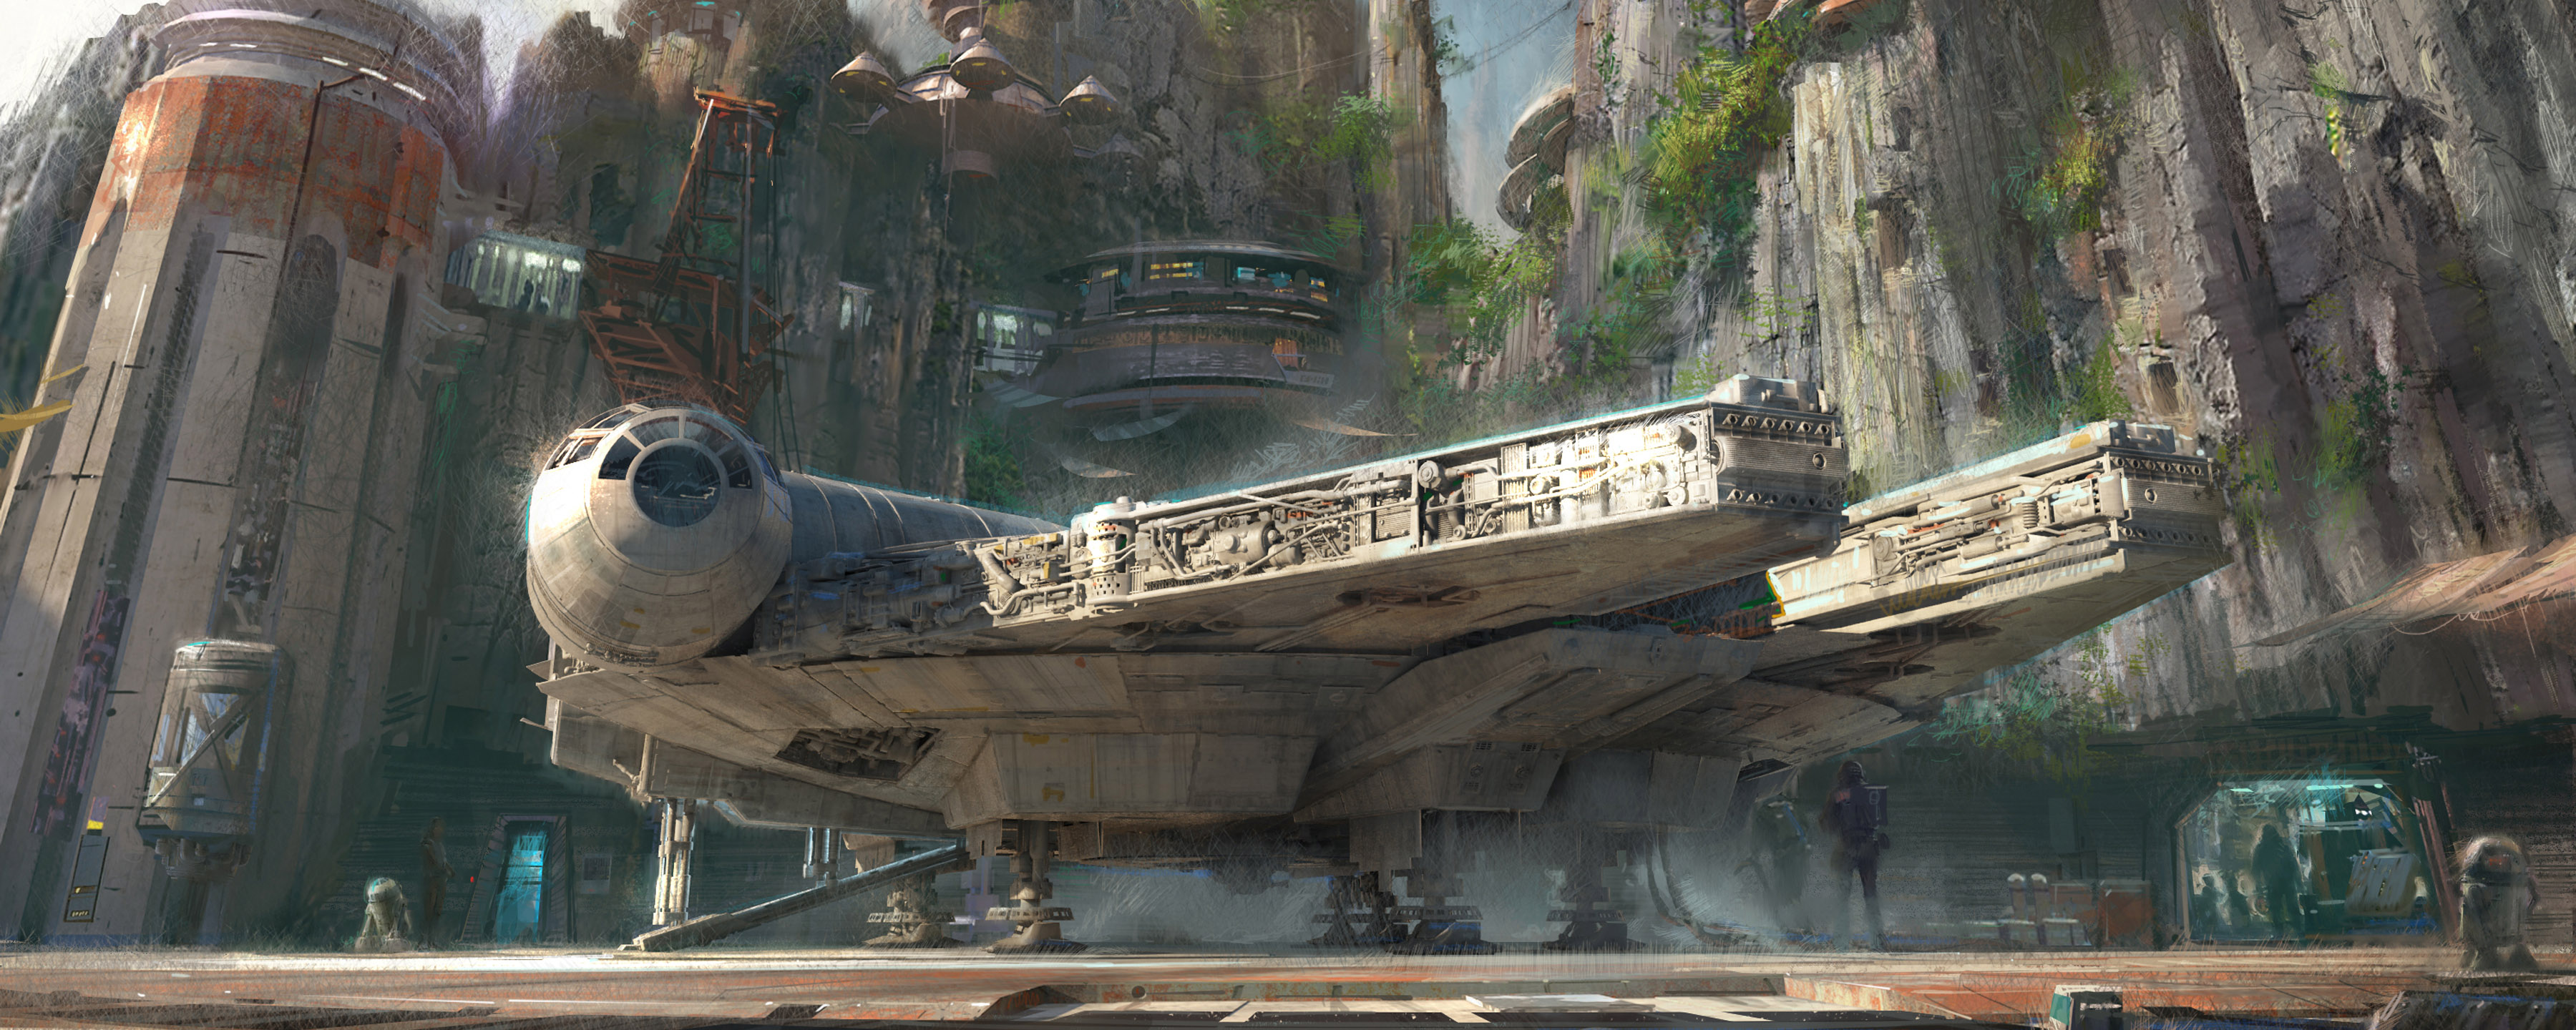 Star Wars-Themed Lands Coming to Disney Parks – Walt Disney Company Chairman and CEO Bob Iger announced at D23 EXPO 2015 that Star Wars-themed lands will be coming to Disneyland park in Anaheim, Calif., and Disney’s Hollywood Studios in Orlando, Fla., creating Disney’s largest single-themed land expansions ever at 14-acres each, transporting guests to a never-before-seen planet, a remote trading port and one of the last stops before wild space where Star Wars characters and their stories come to life.  These authentic lands will have two signature attractions, including the ability to take the controls of one of the most recognizable ships in the galaxy, the Millennium Falcon, on a customized secret mission, and an epic Star Wars adventure that puts guests in the middle of a climactic battle. (Disney Parks